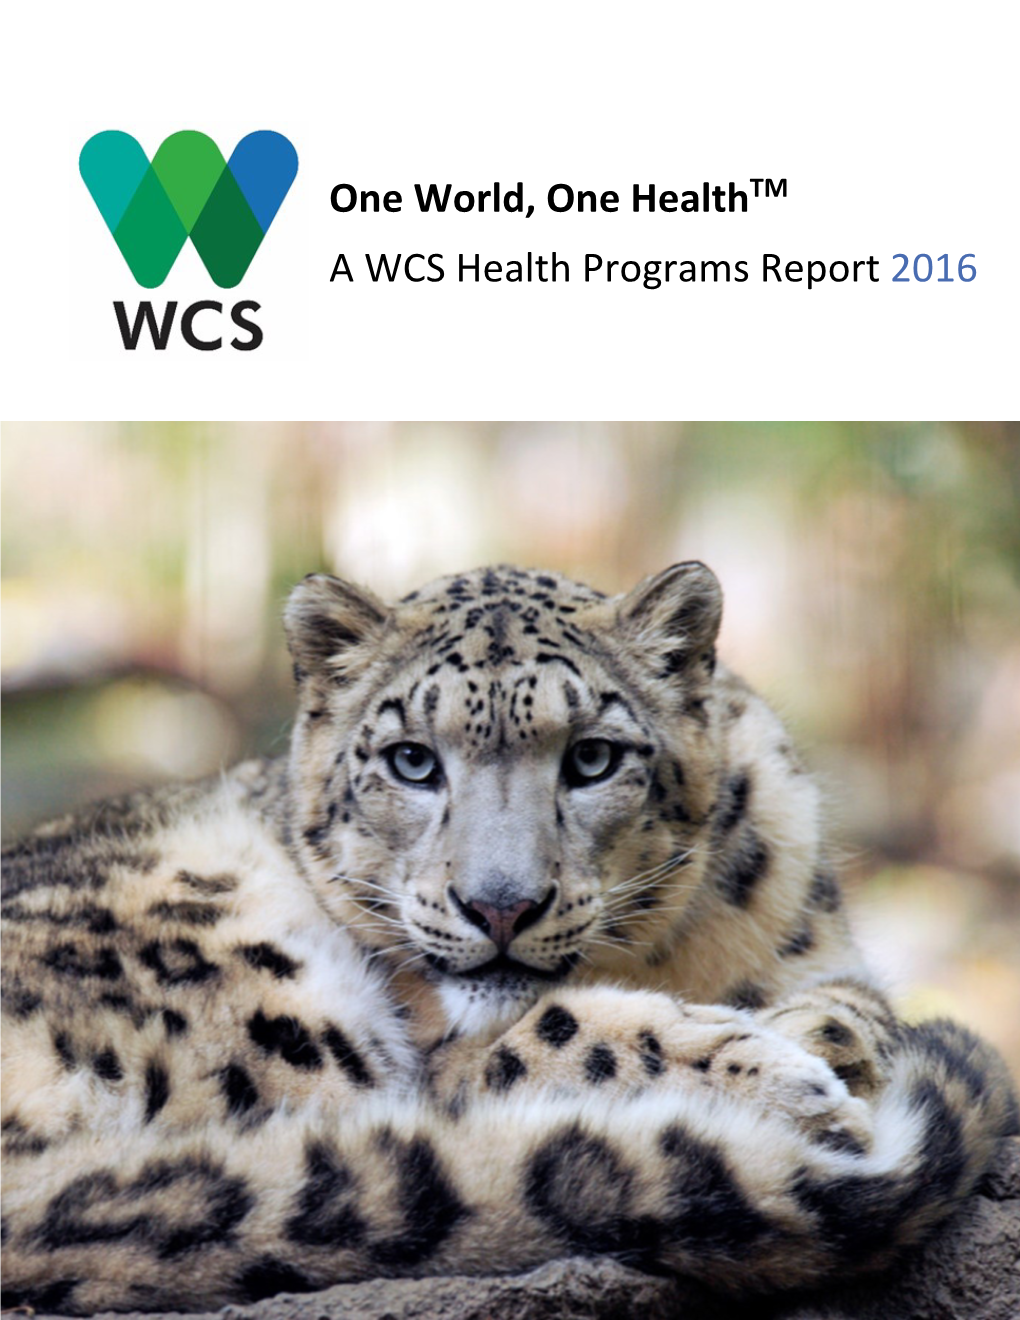 One World, One Healthtm a WCS Health Programs Report 2016